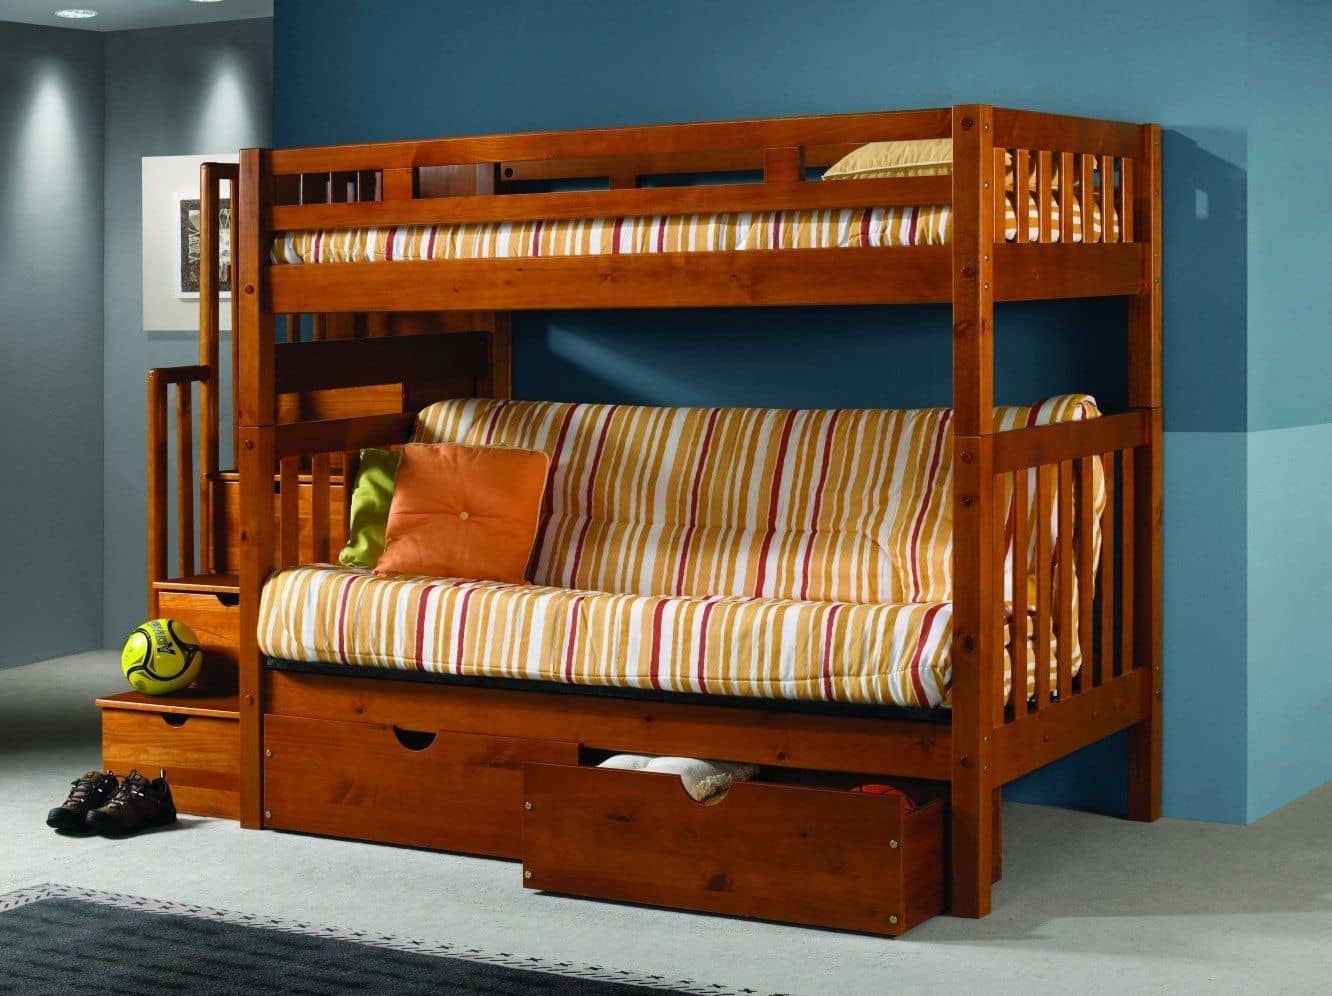 bunk beds with storage stairs